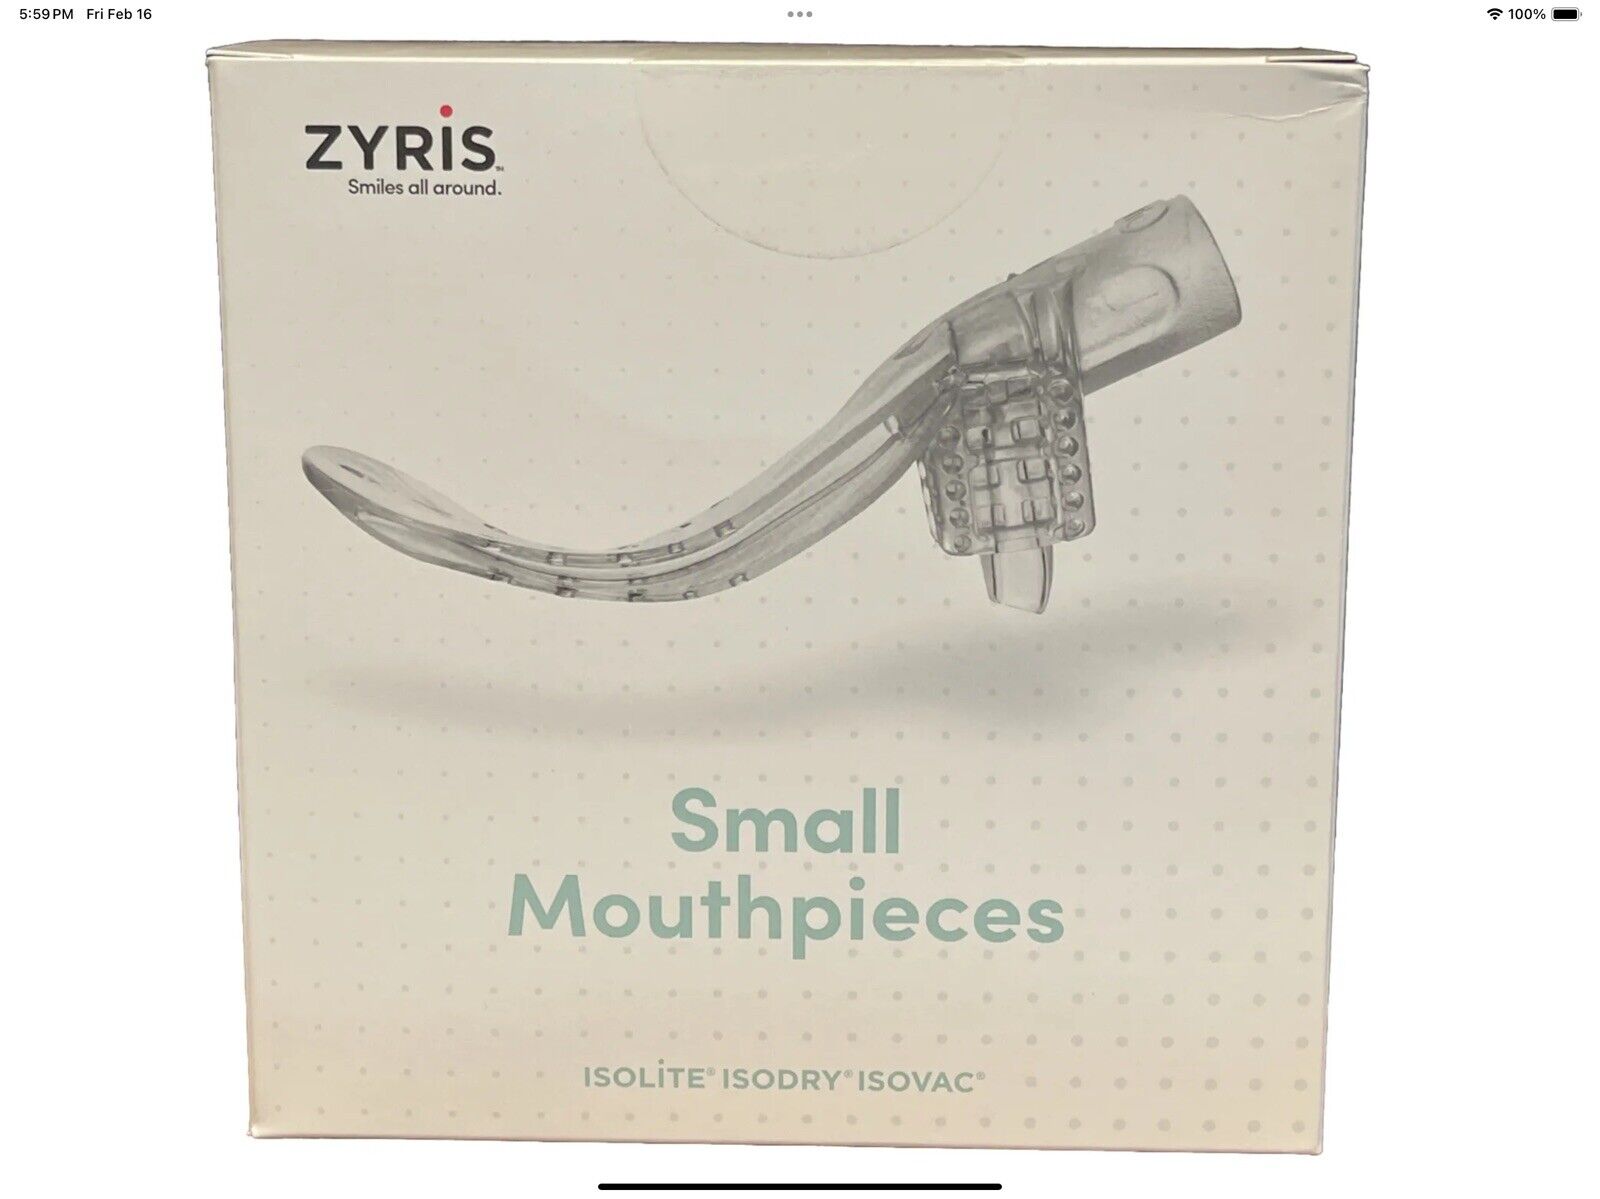 Dental Zyris Isolite Small Mouthpiece Ref # CIL0601 10pcs Isodry/ Isovac New OB